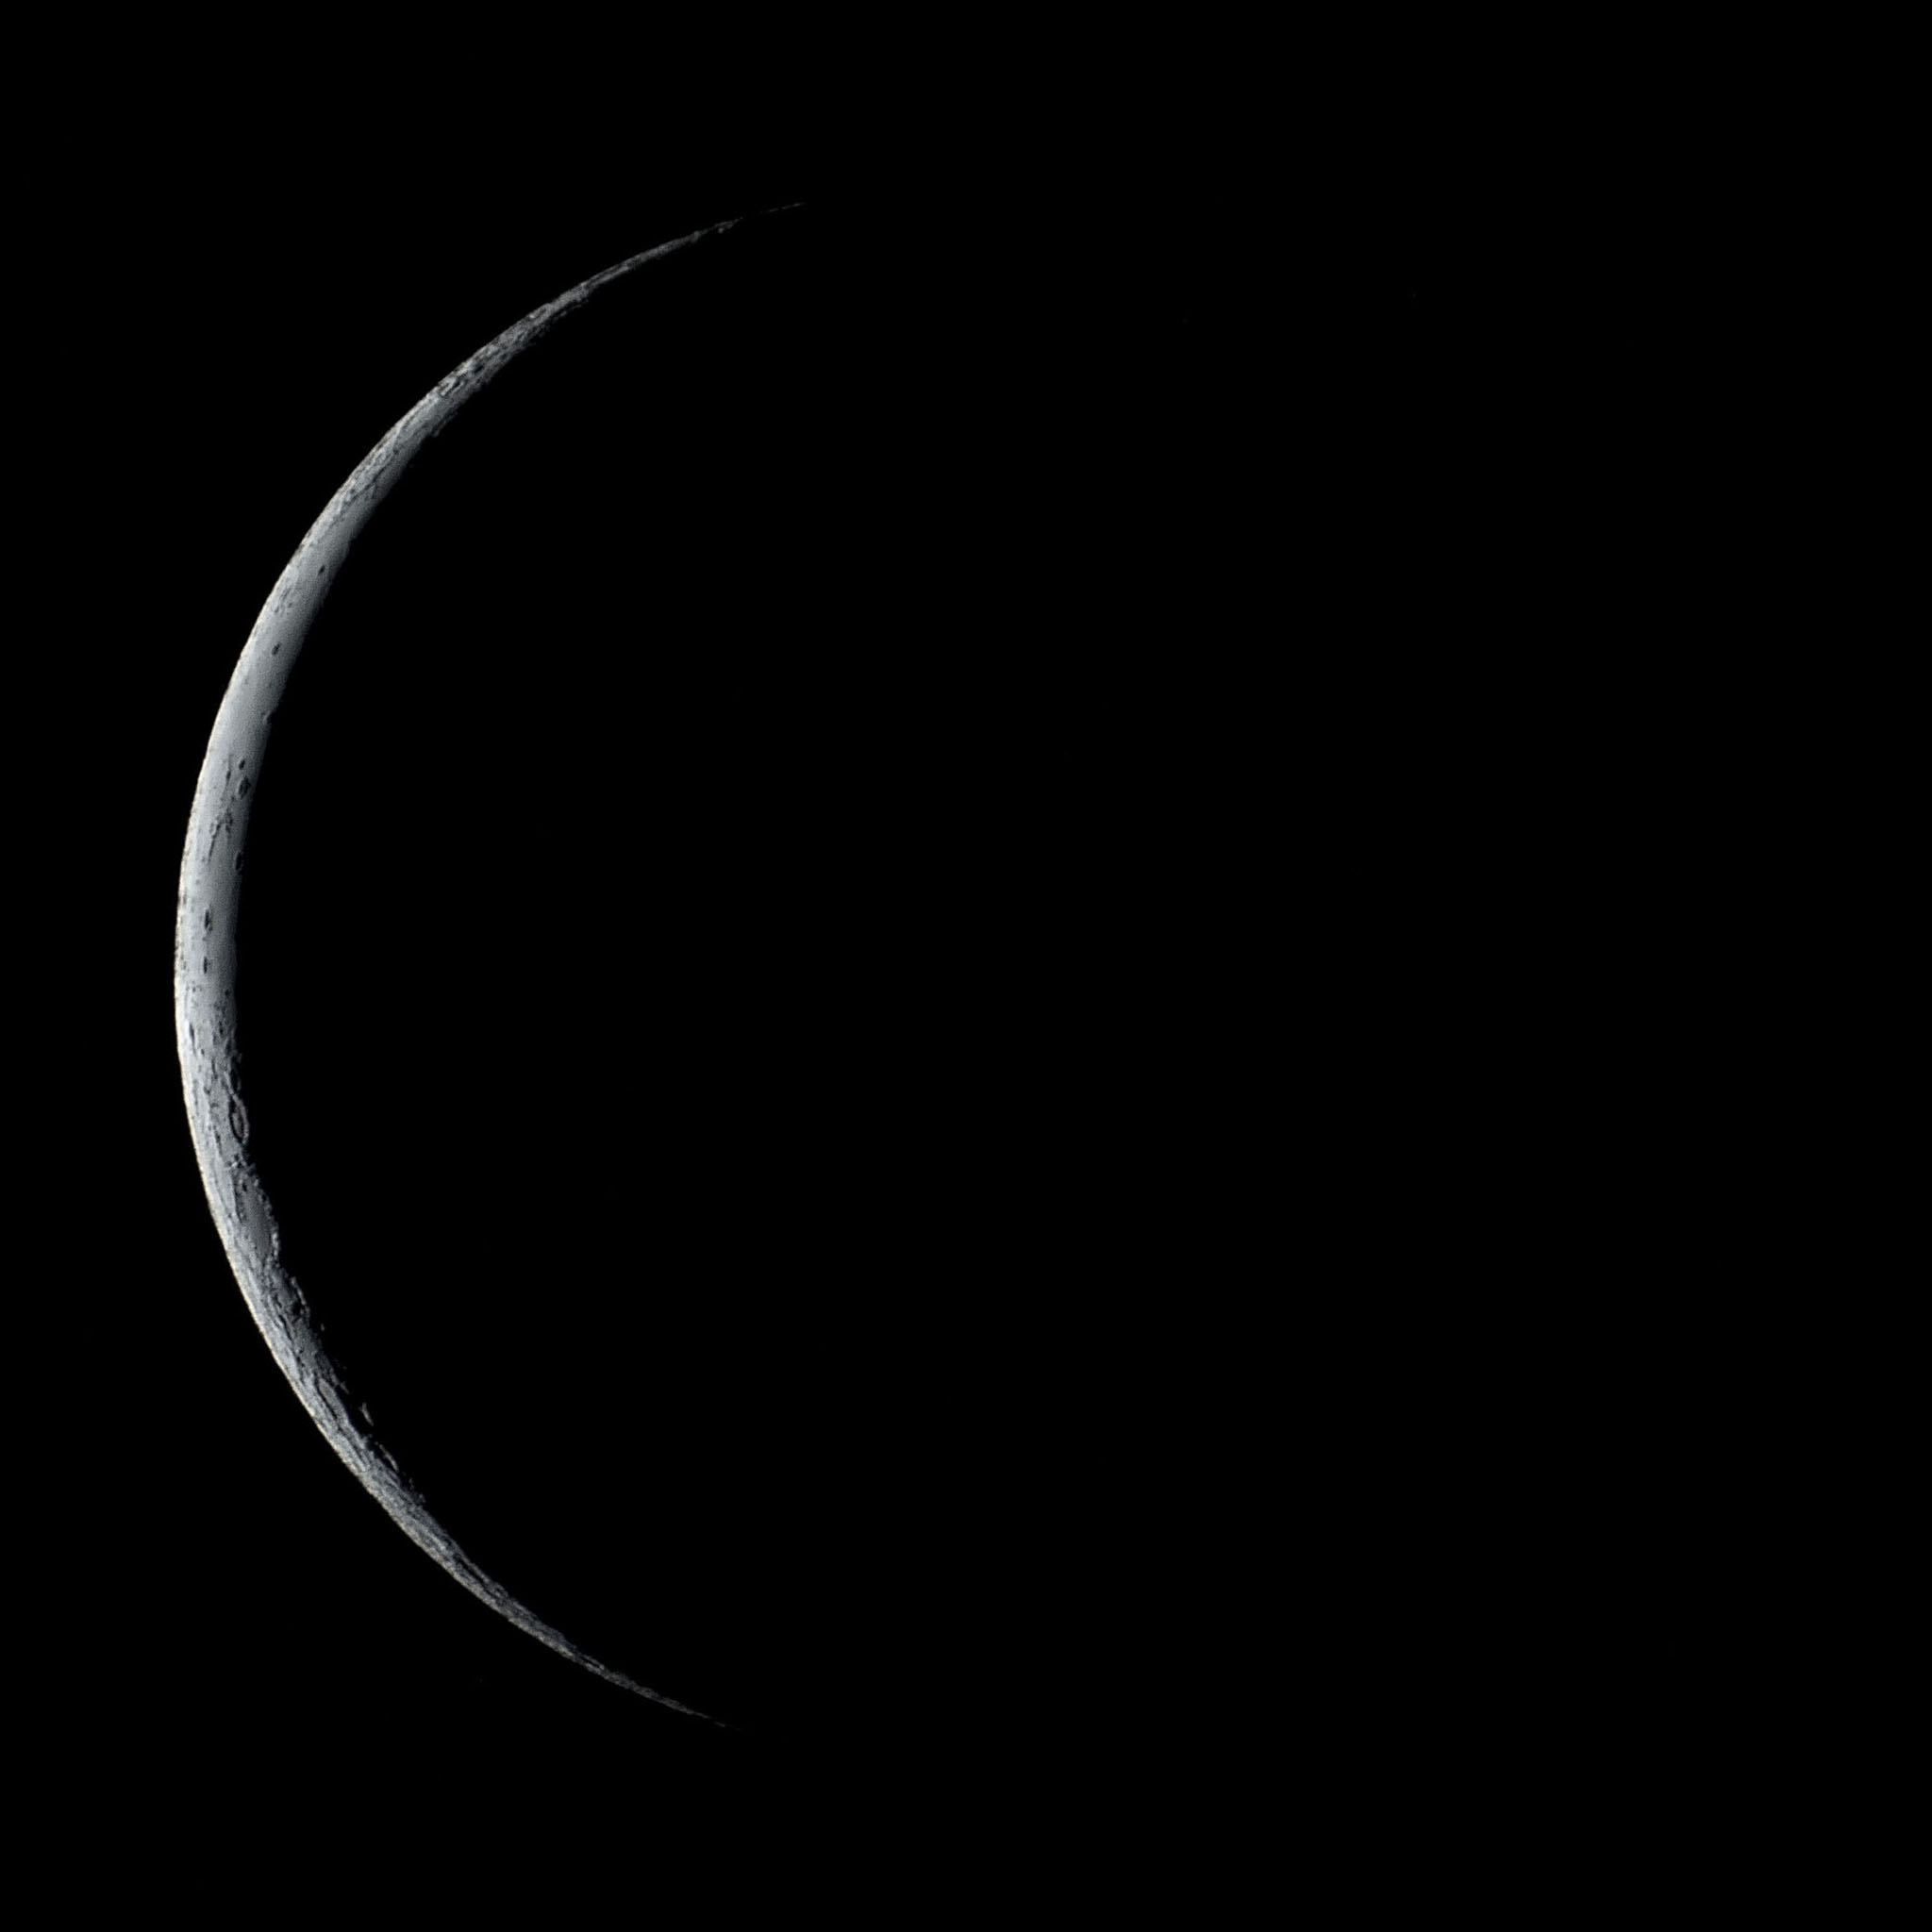 27 Moon Thin Waning Crescent 140823 not so bad Astrophotography